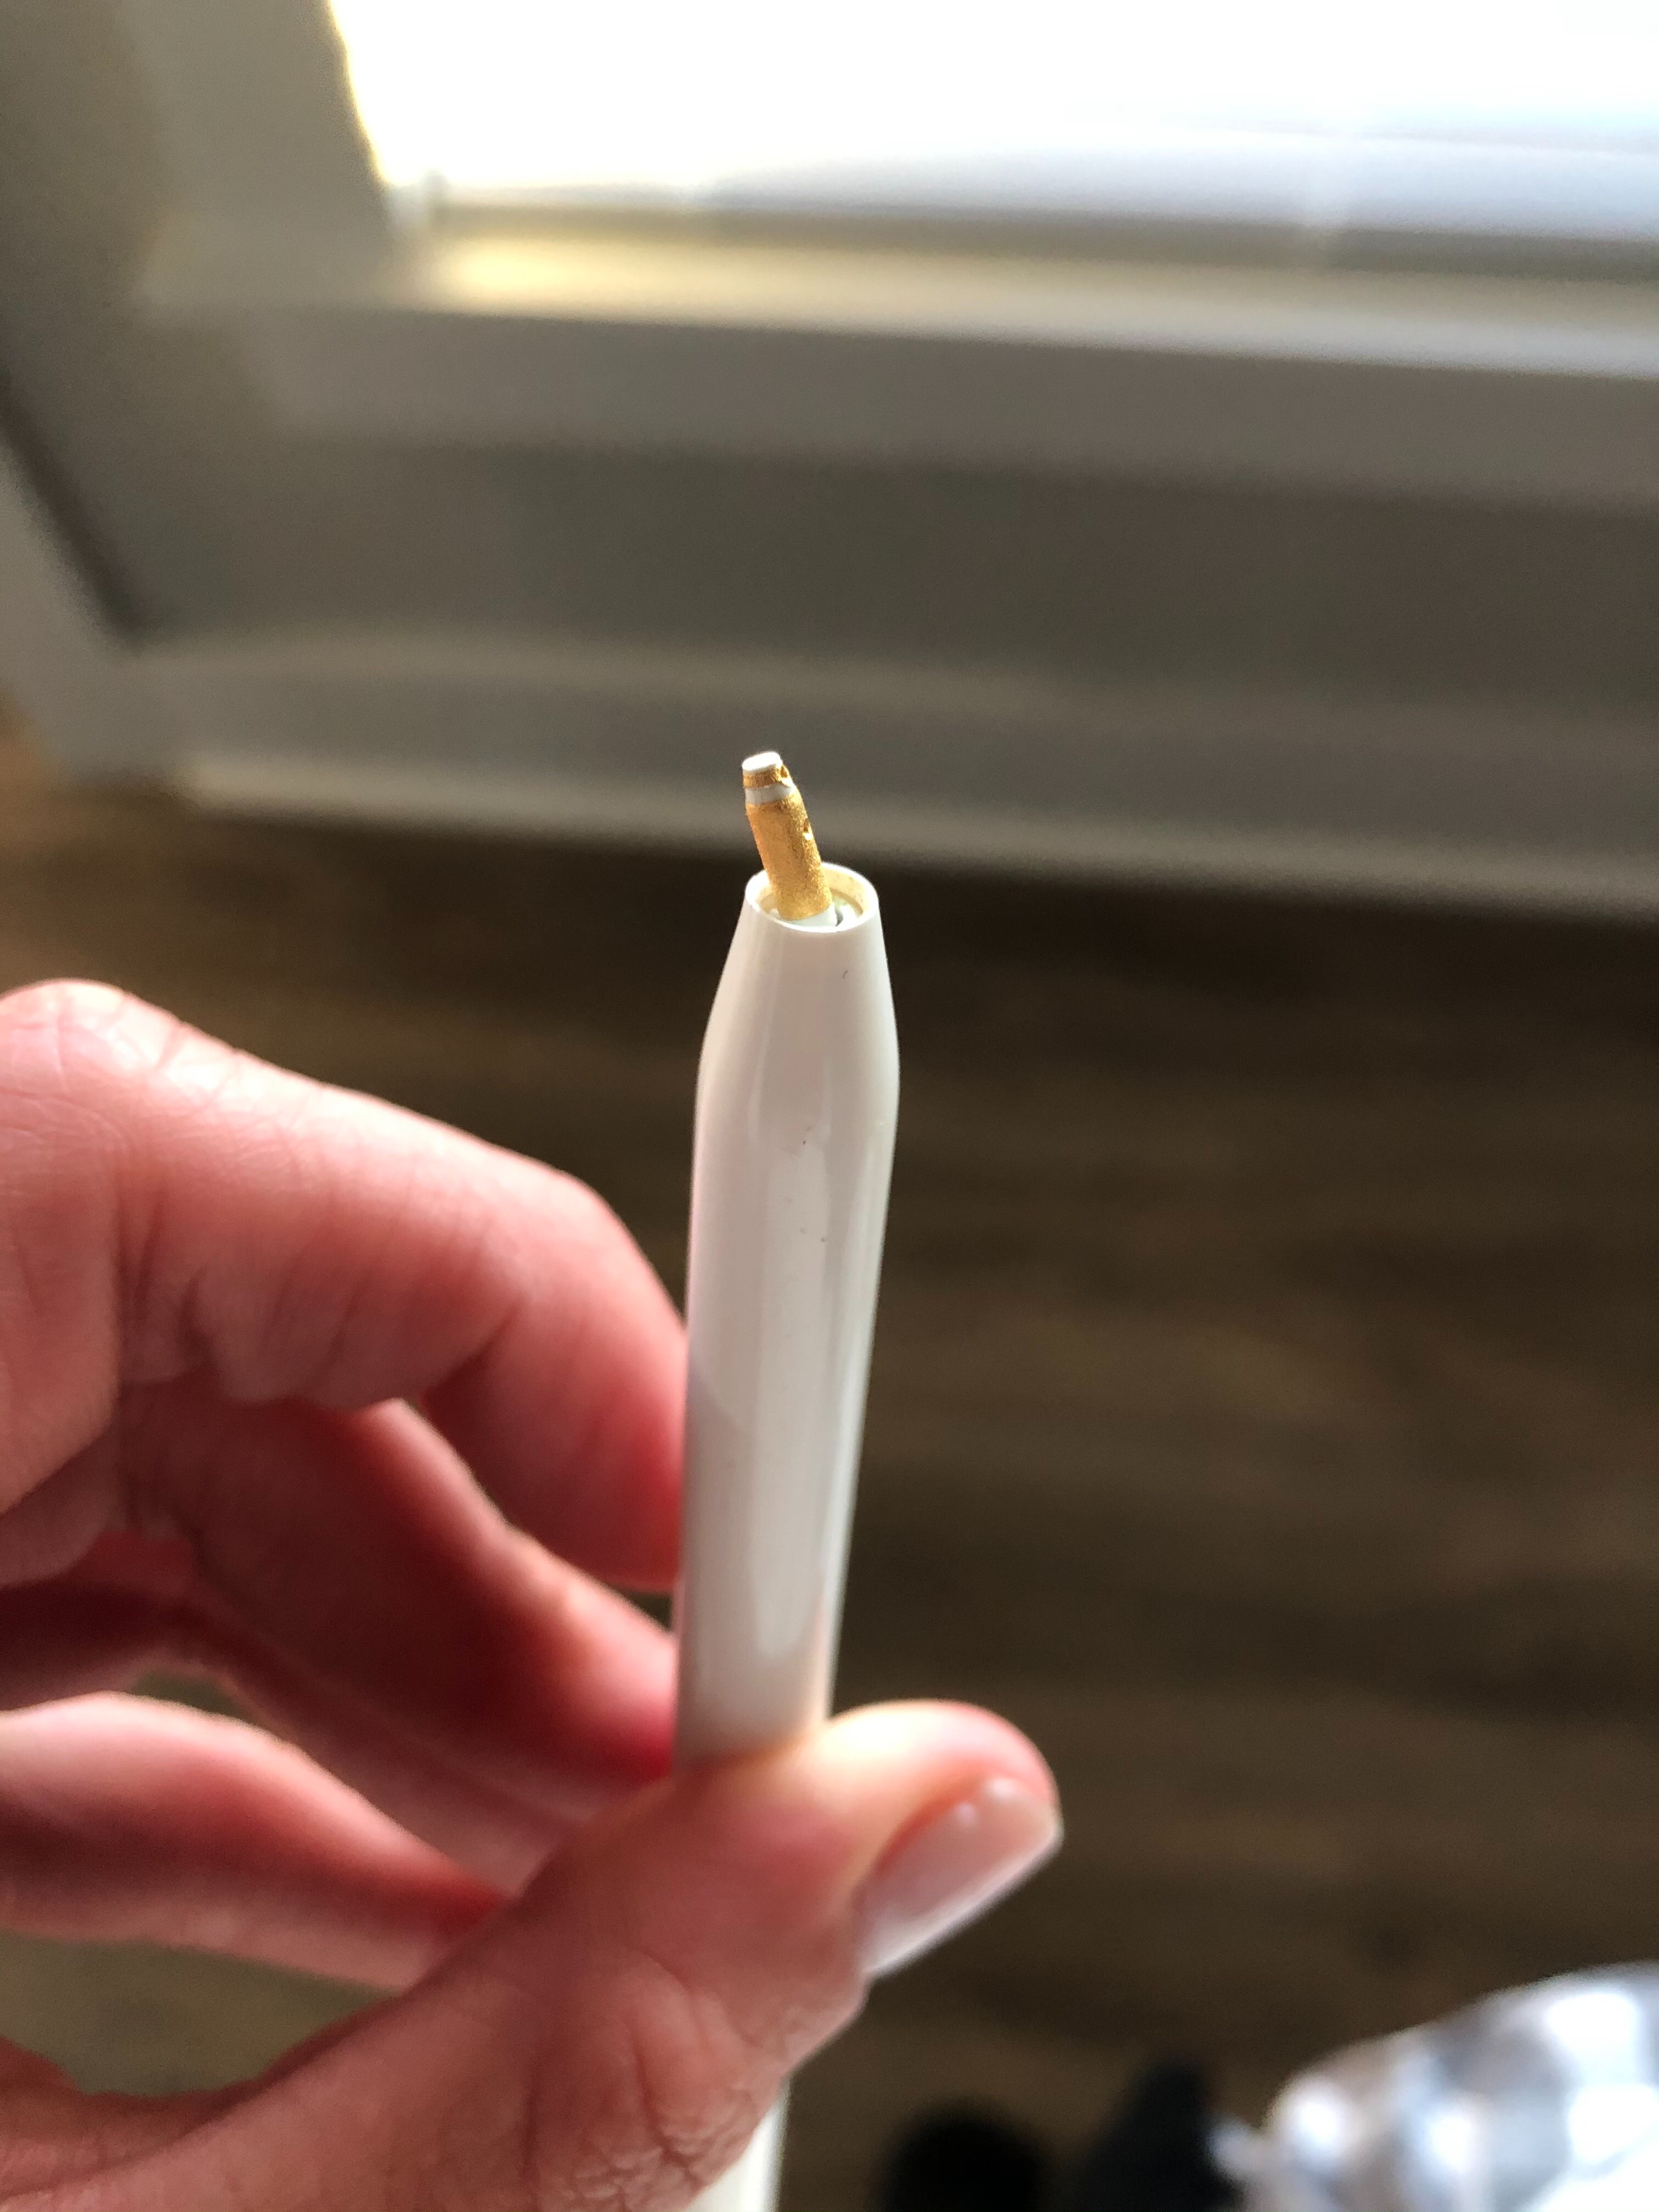 Does the Apple Pencil break easily?